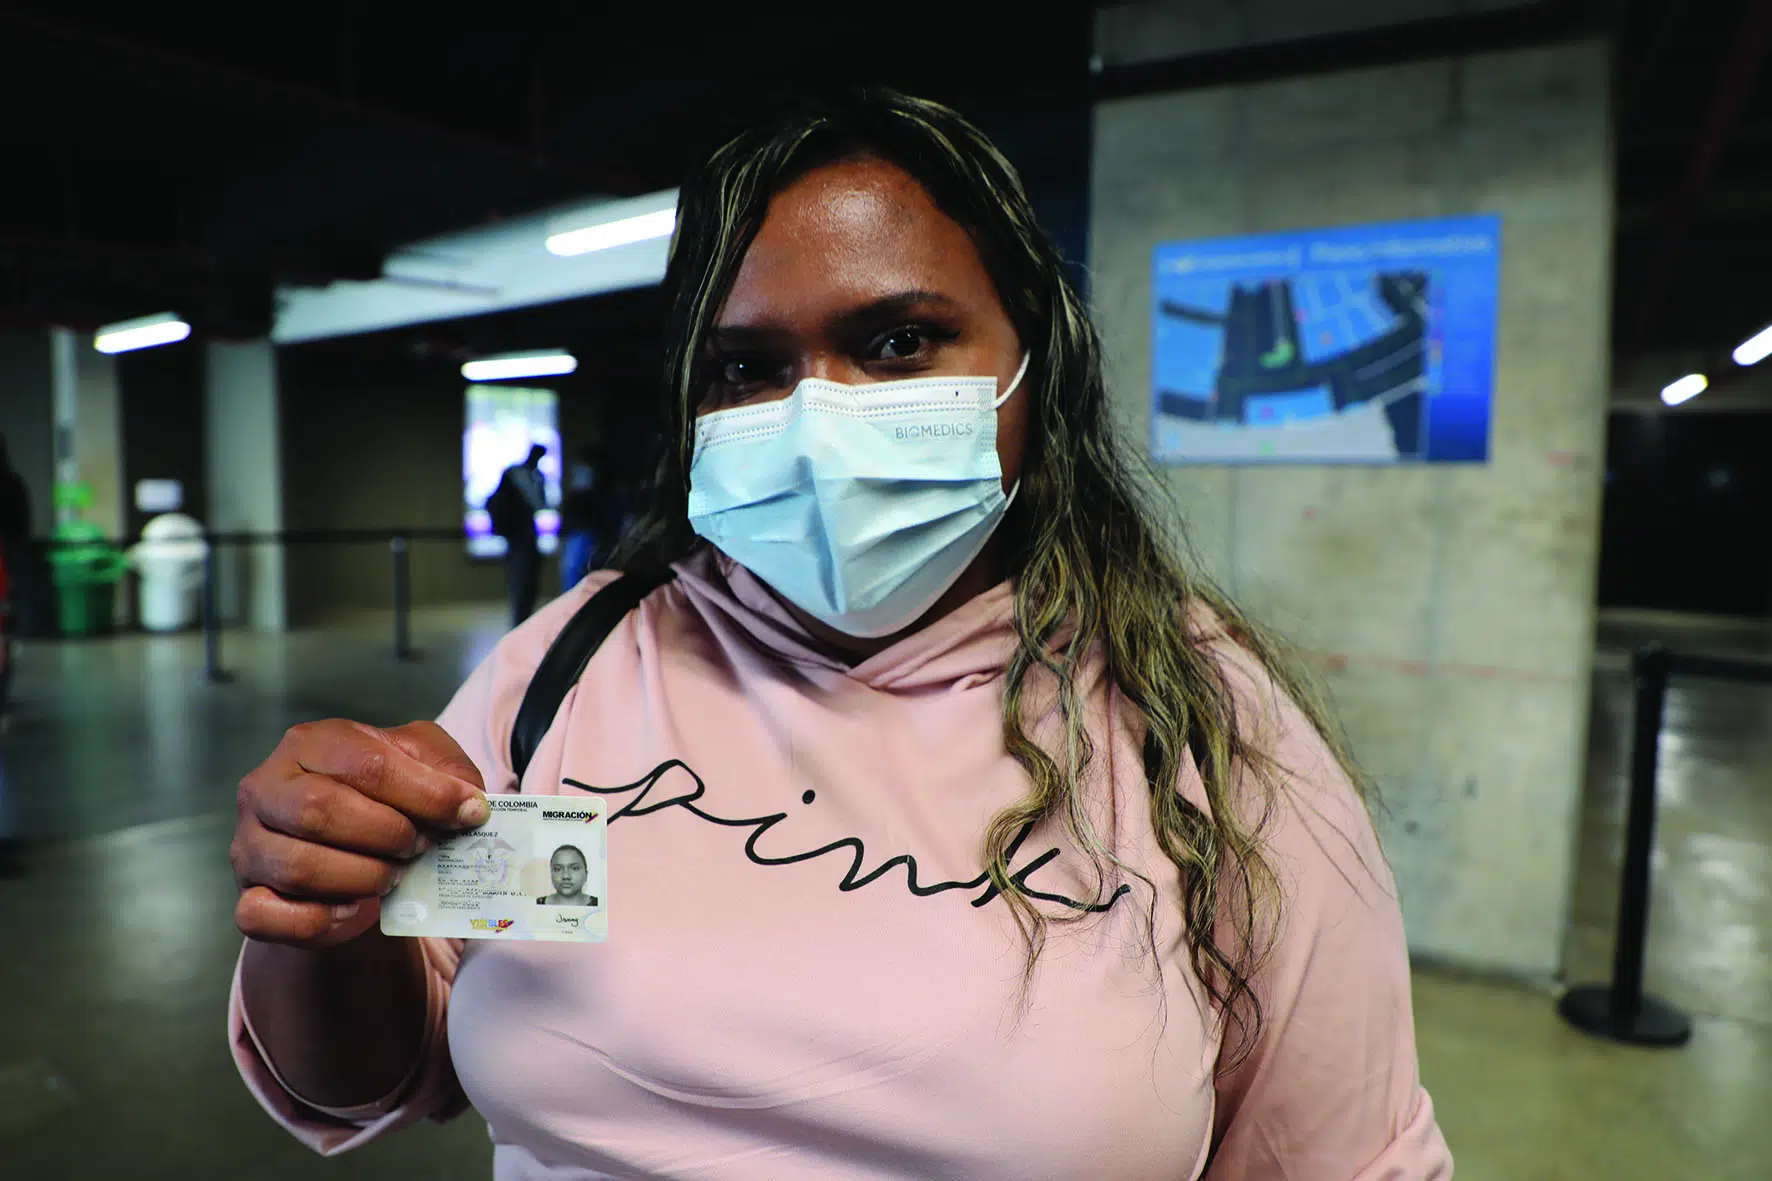 On February 2022, Janny from Venezuela received her Temporary Protection Permit in Bogotá, Colombia.